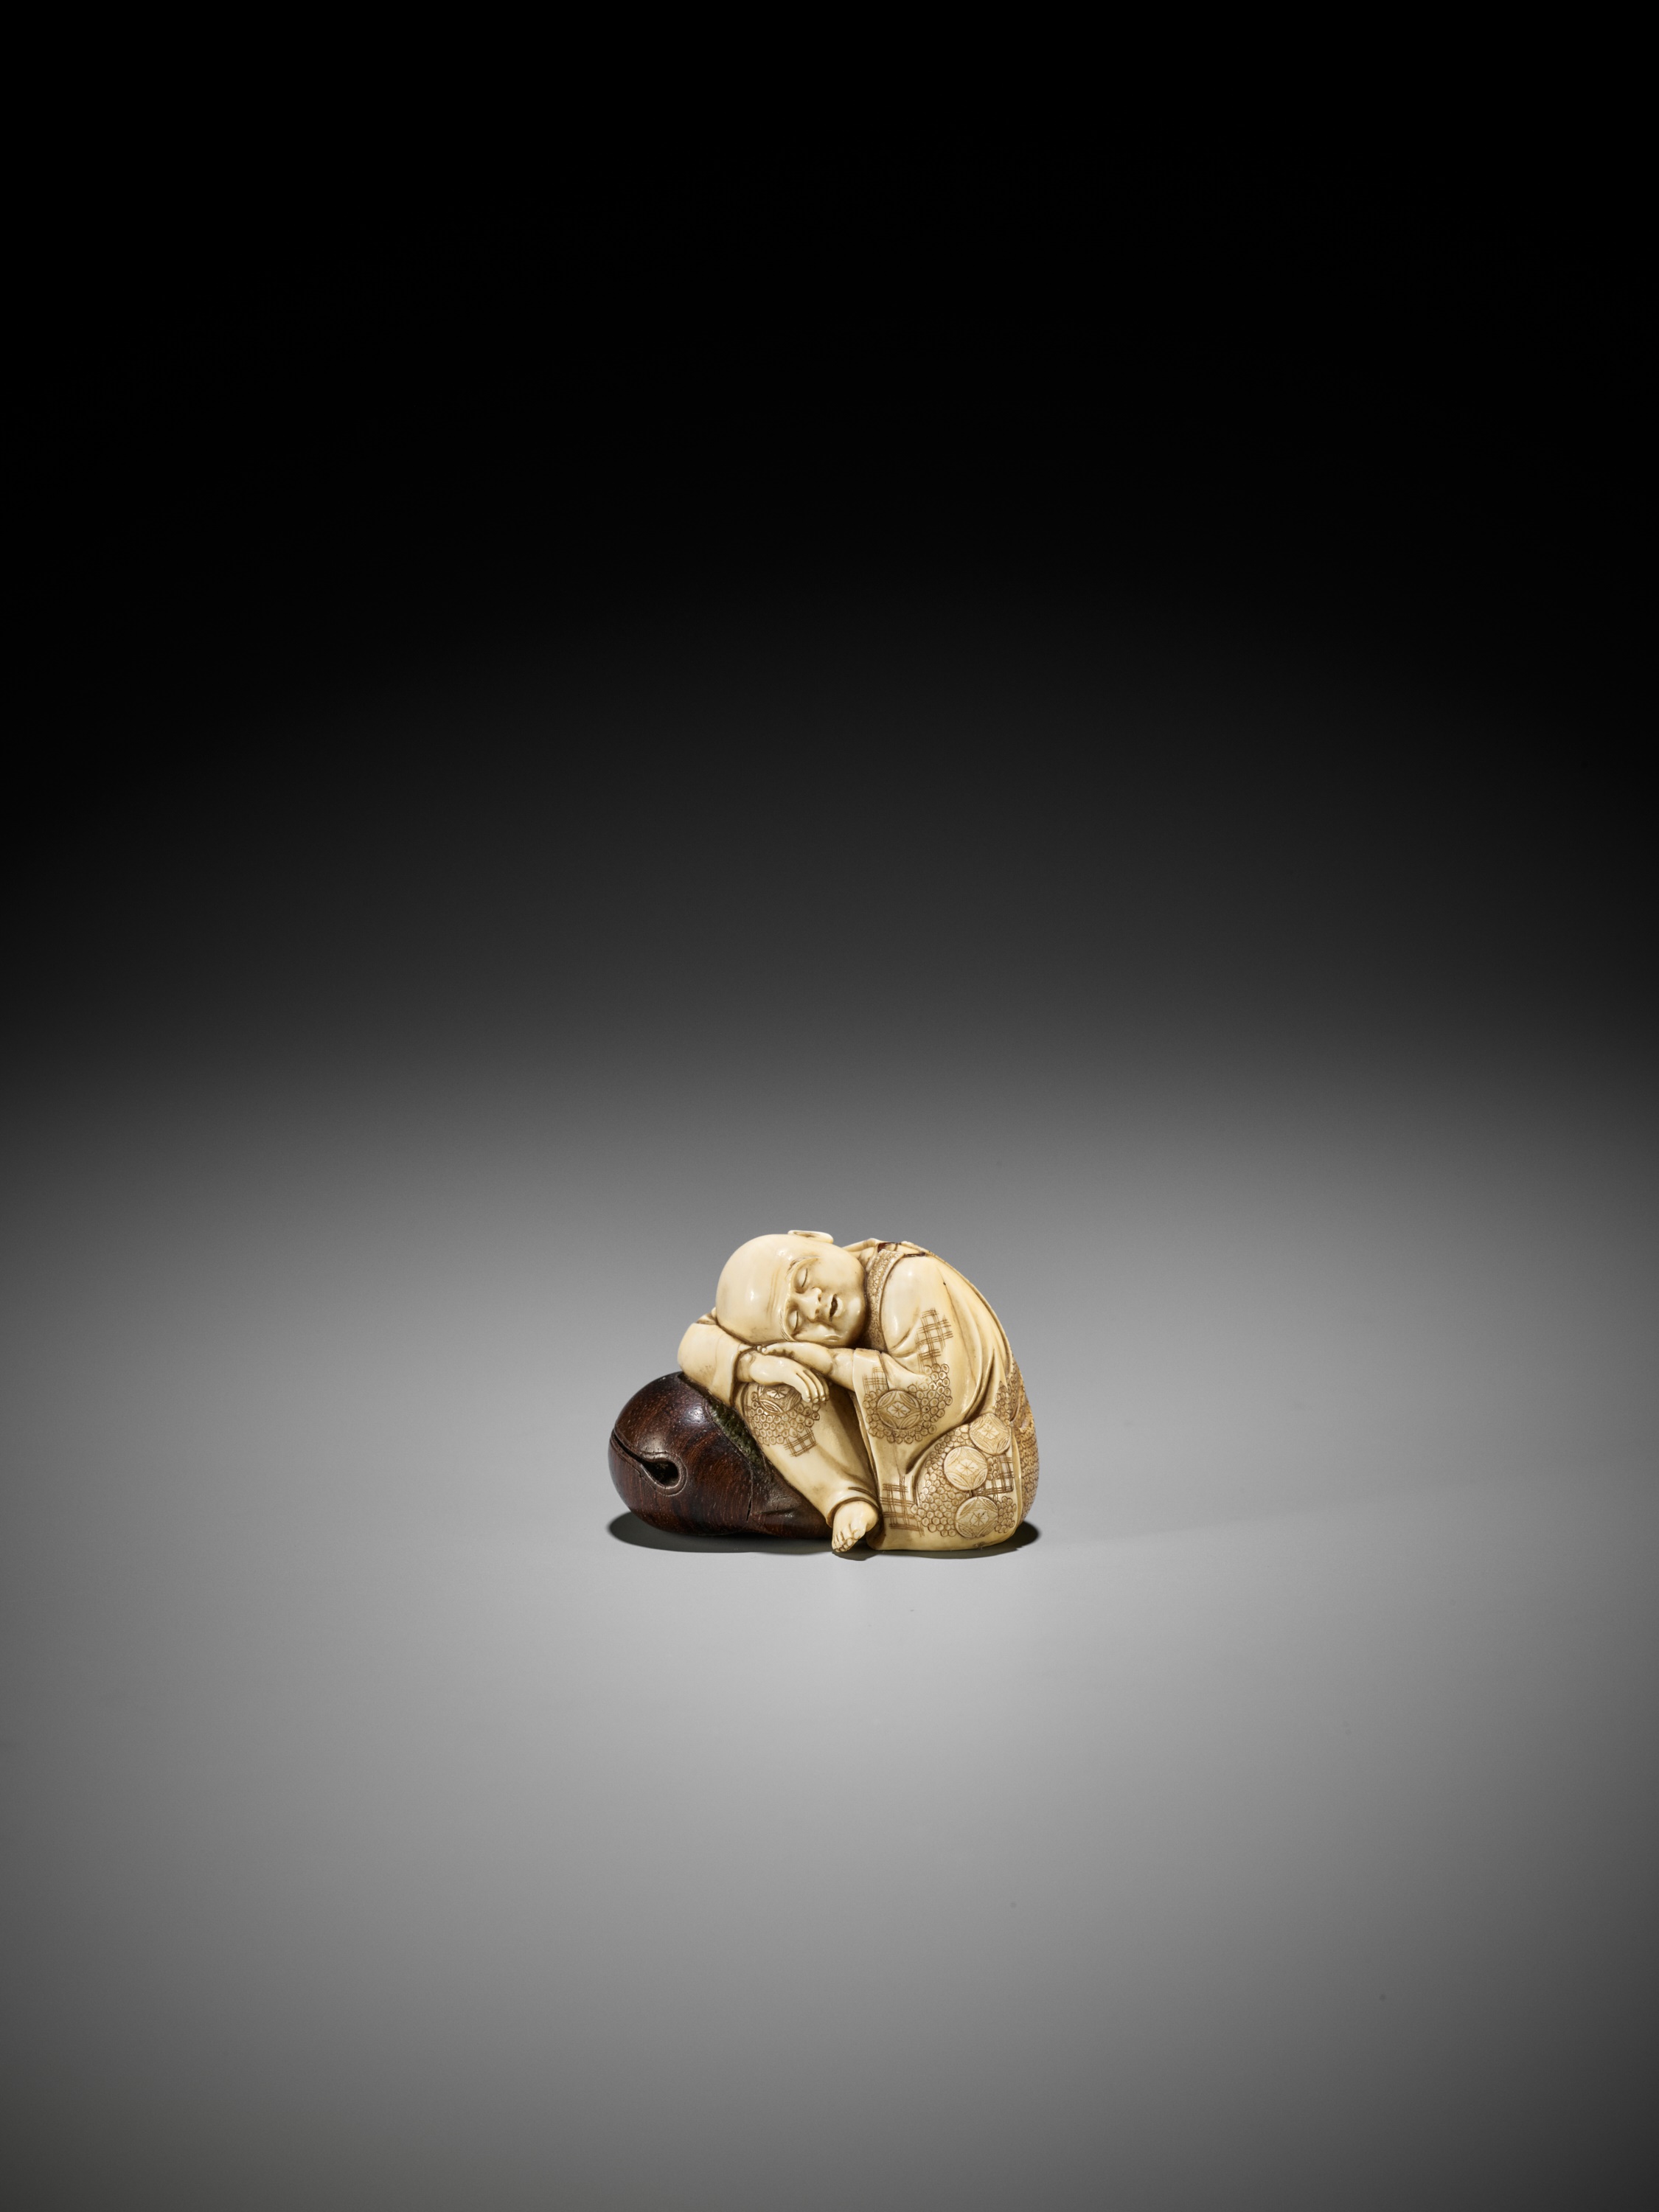 GYOKUSUI: A FINE TOKYO SCHOOL IVORY AND WOOD NETSUKE OF A PRIEST RESTING ON A MOKUGYO - Image 2 of 11